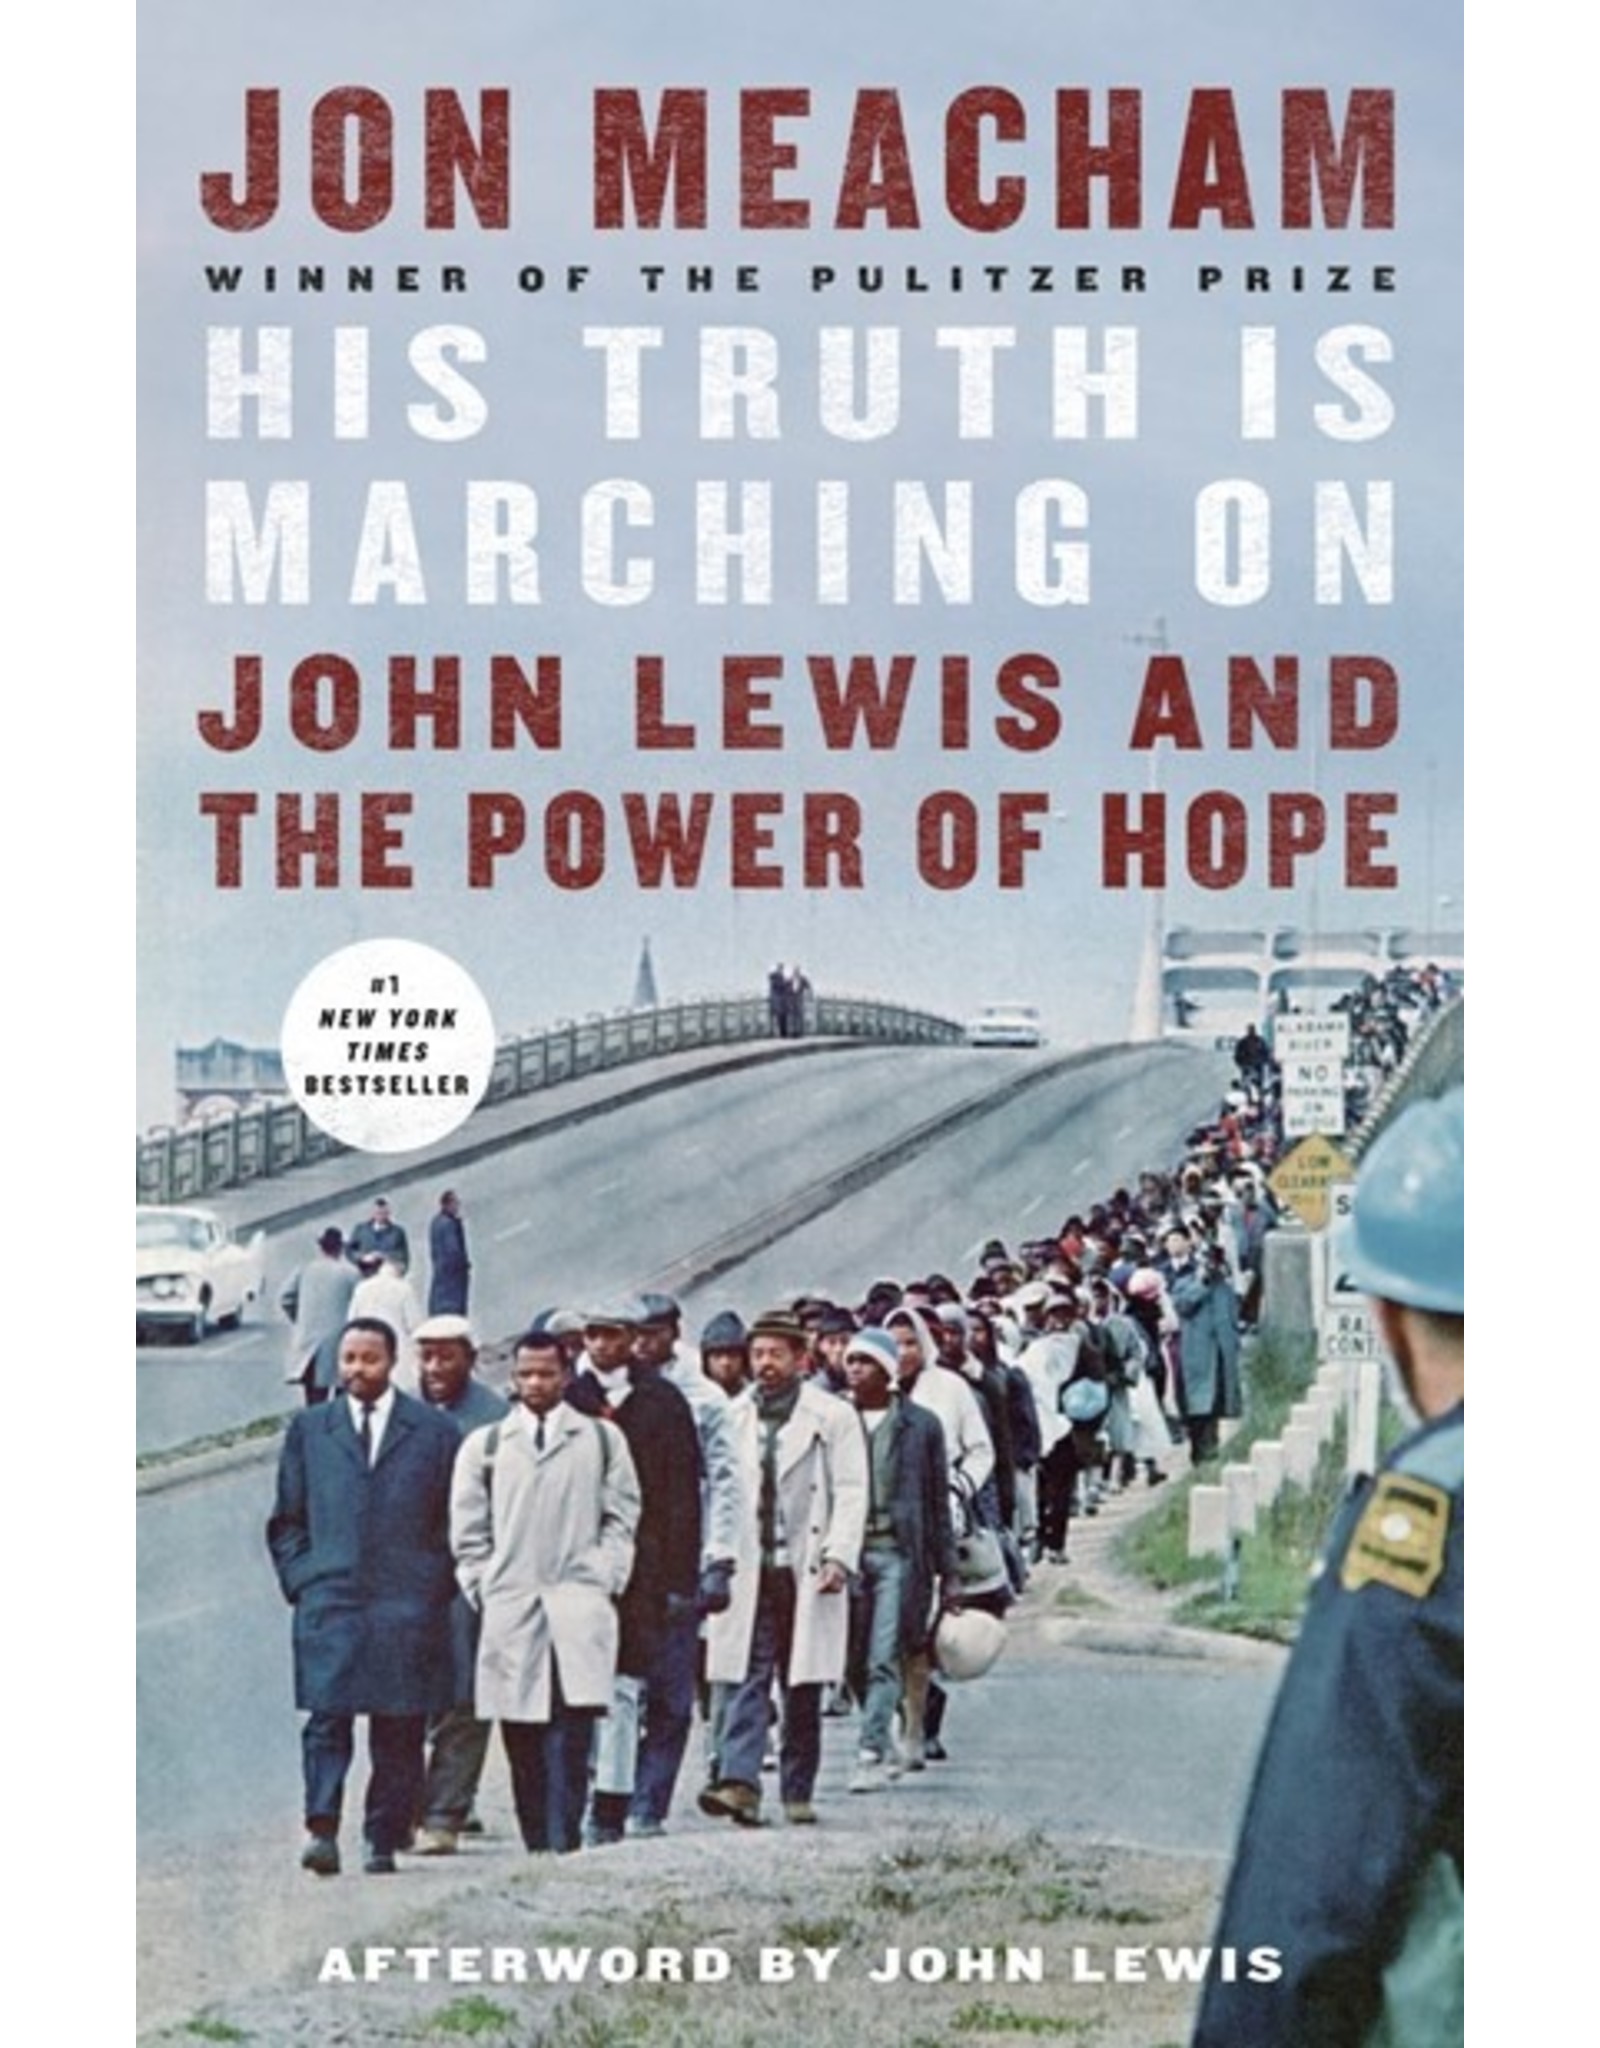 Books His Truth is Marching On: John Lewis and The Power of Hope by Jon Meacham